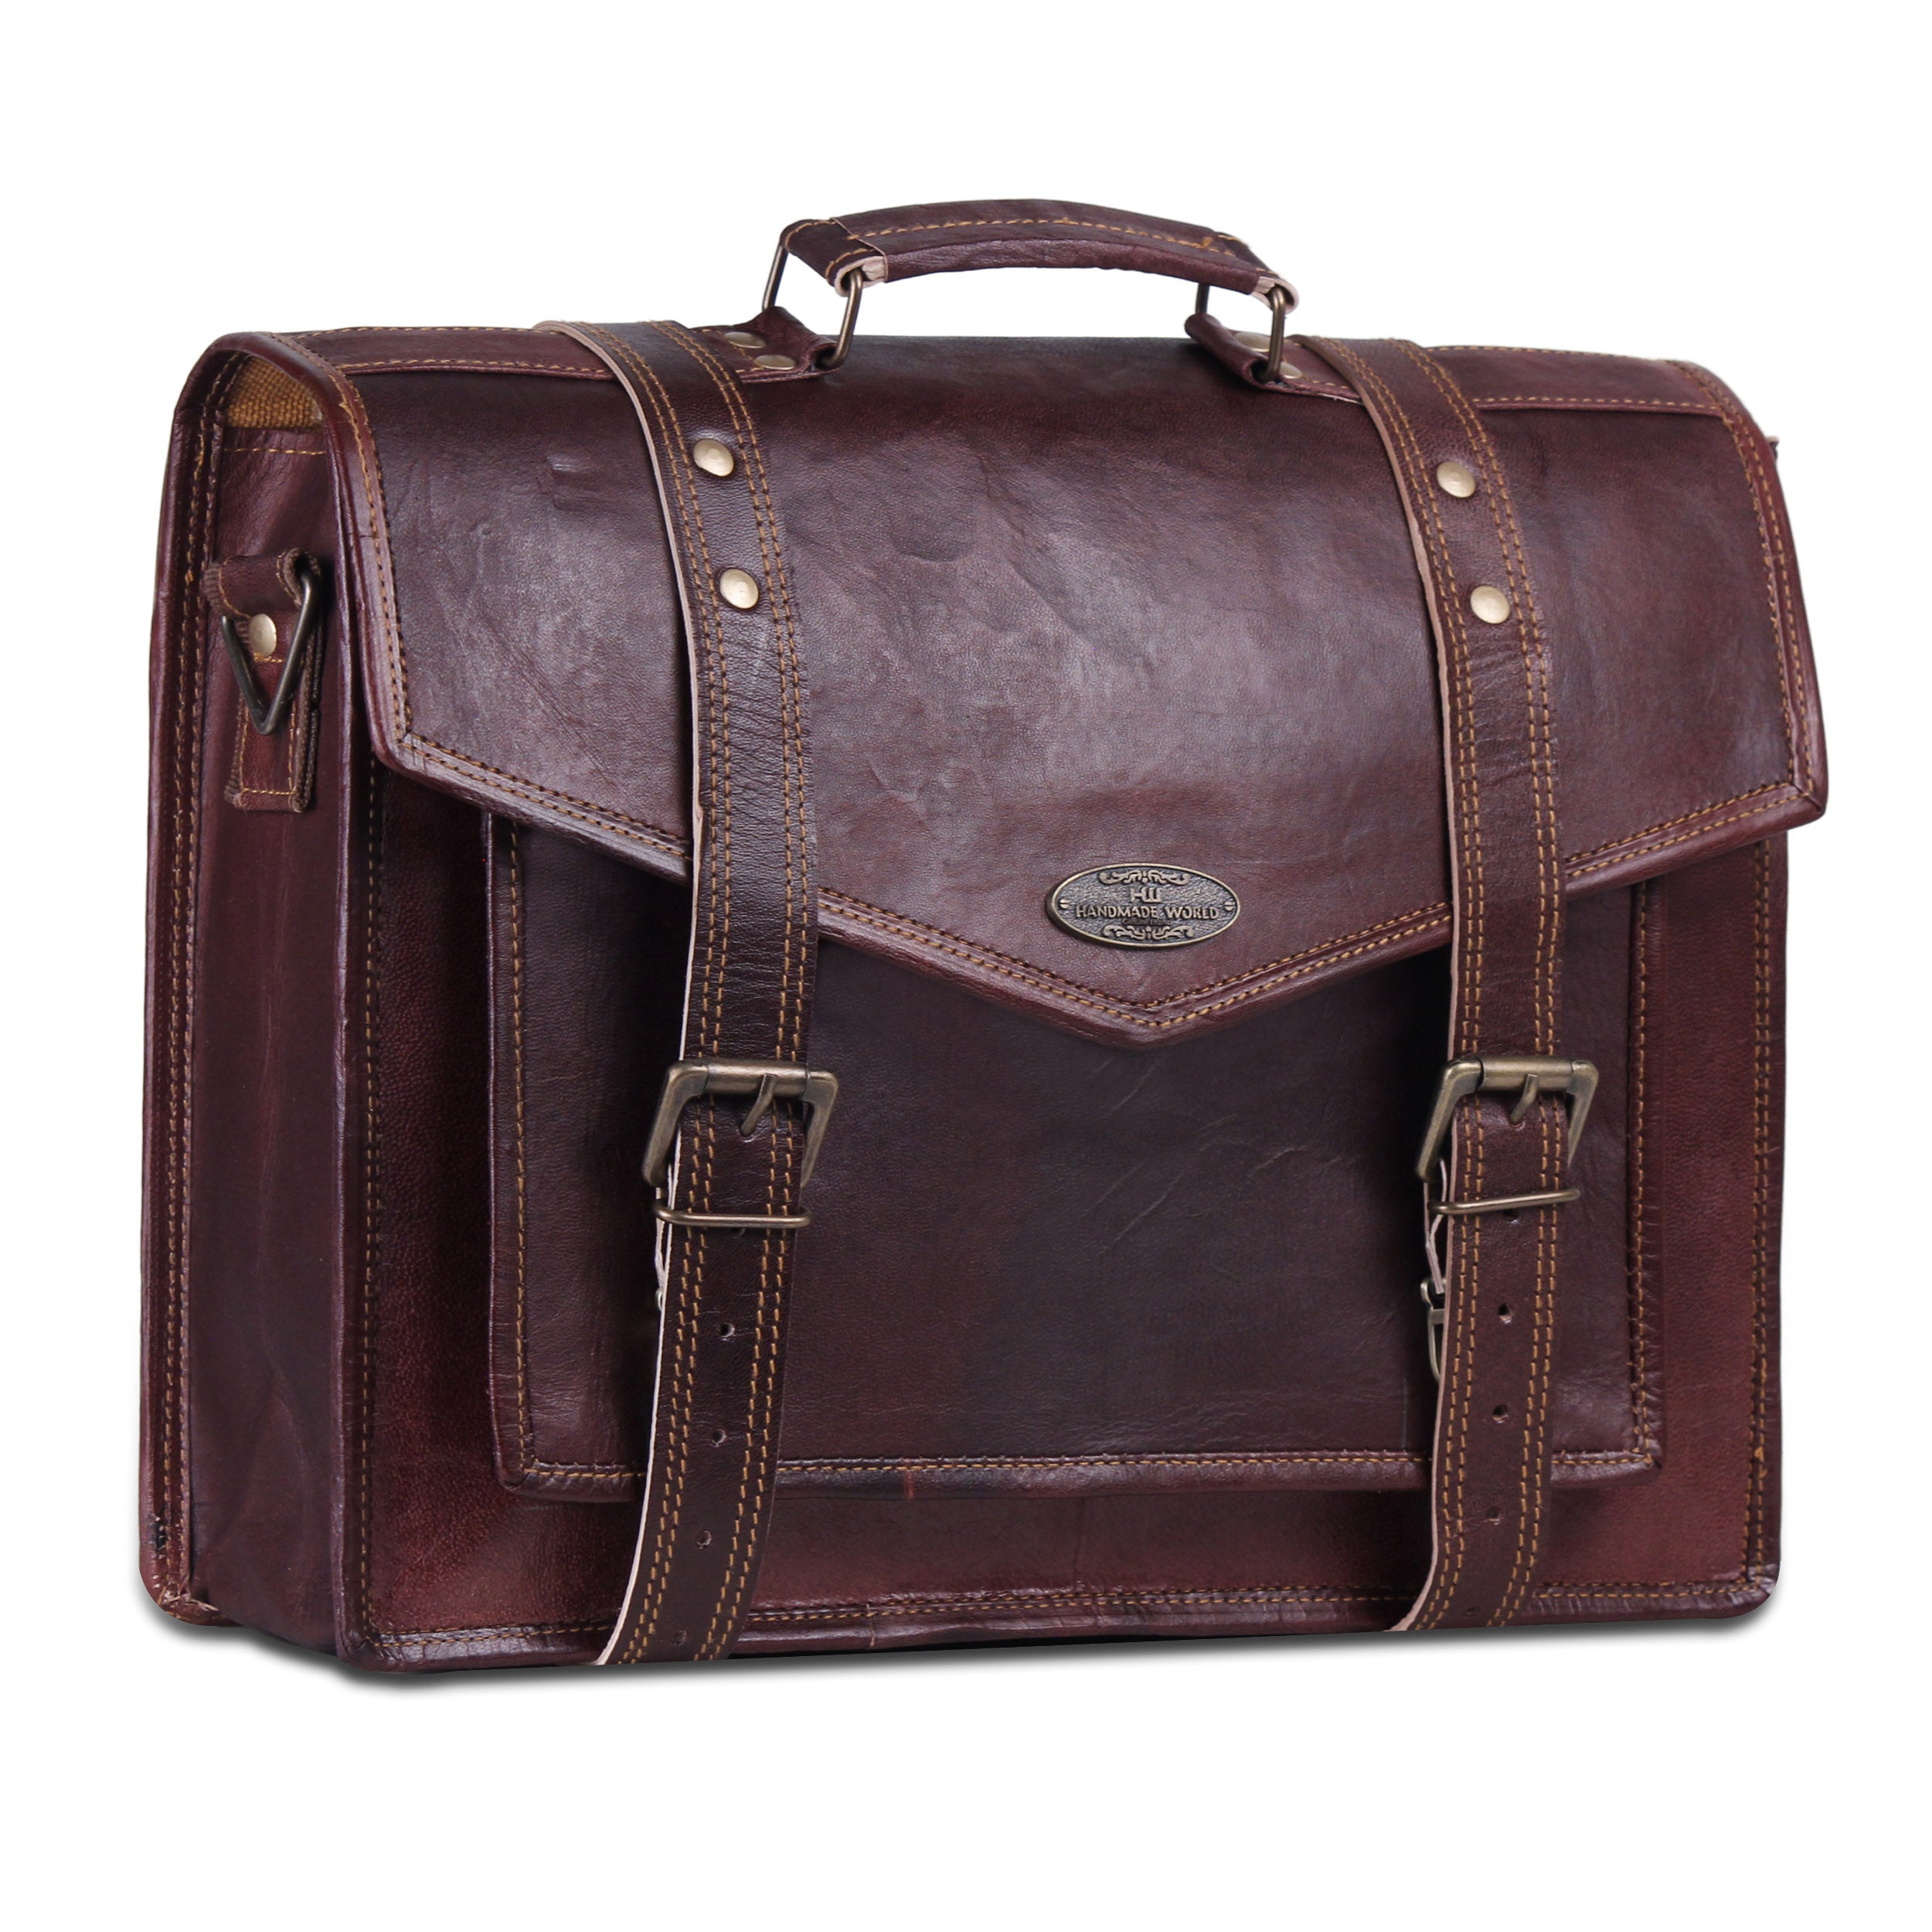 V Flap Brown Leather Messenger Bag with Top Handle